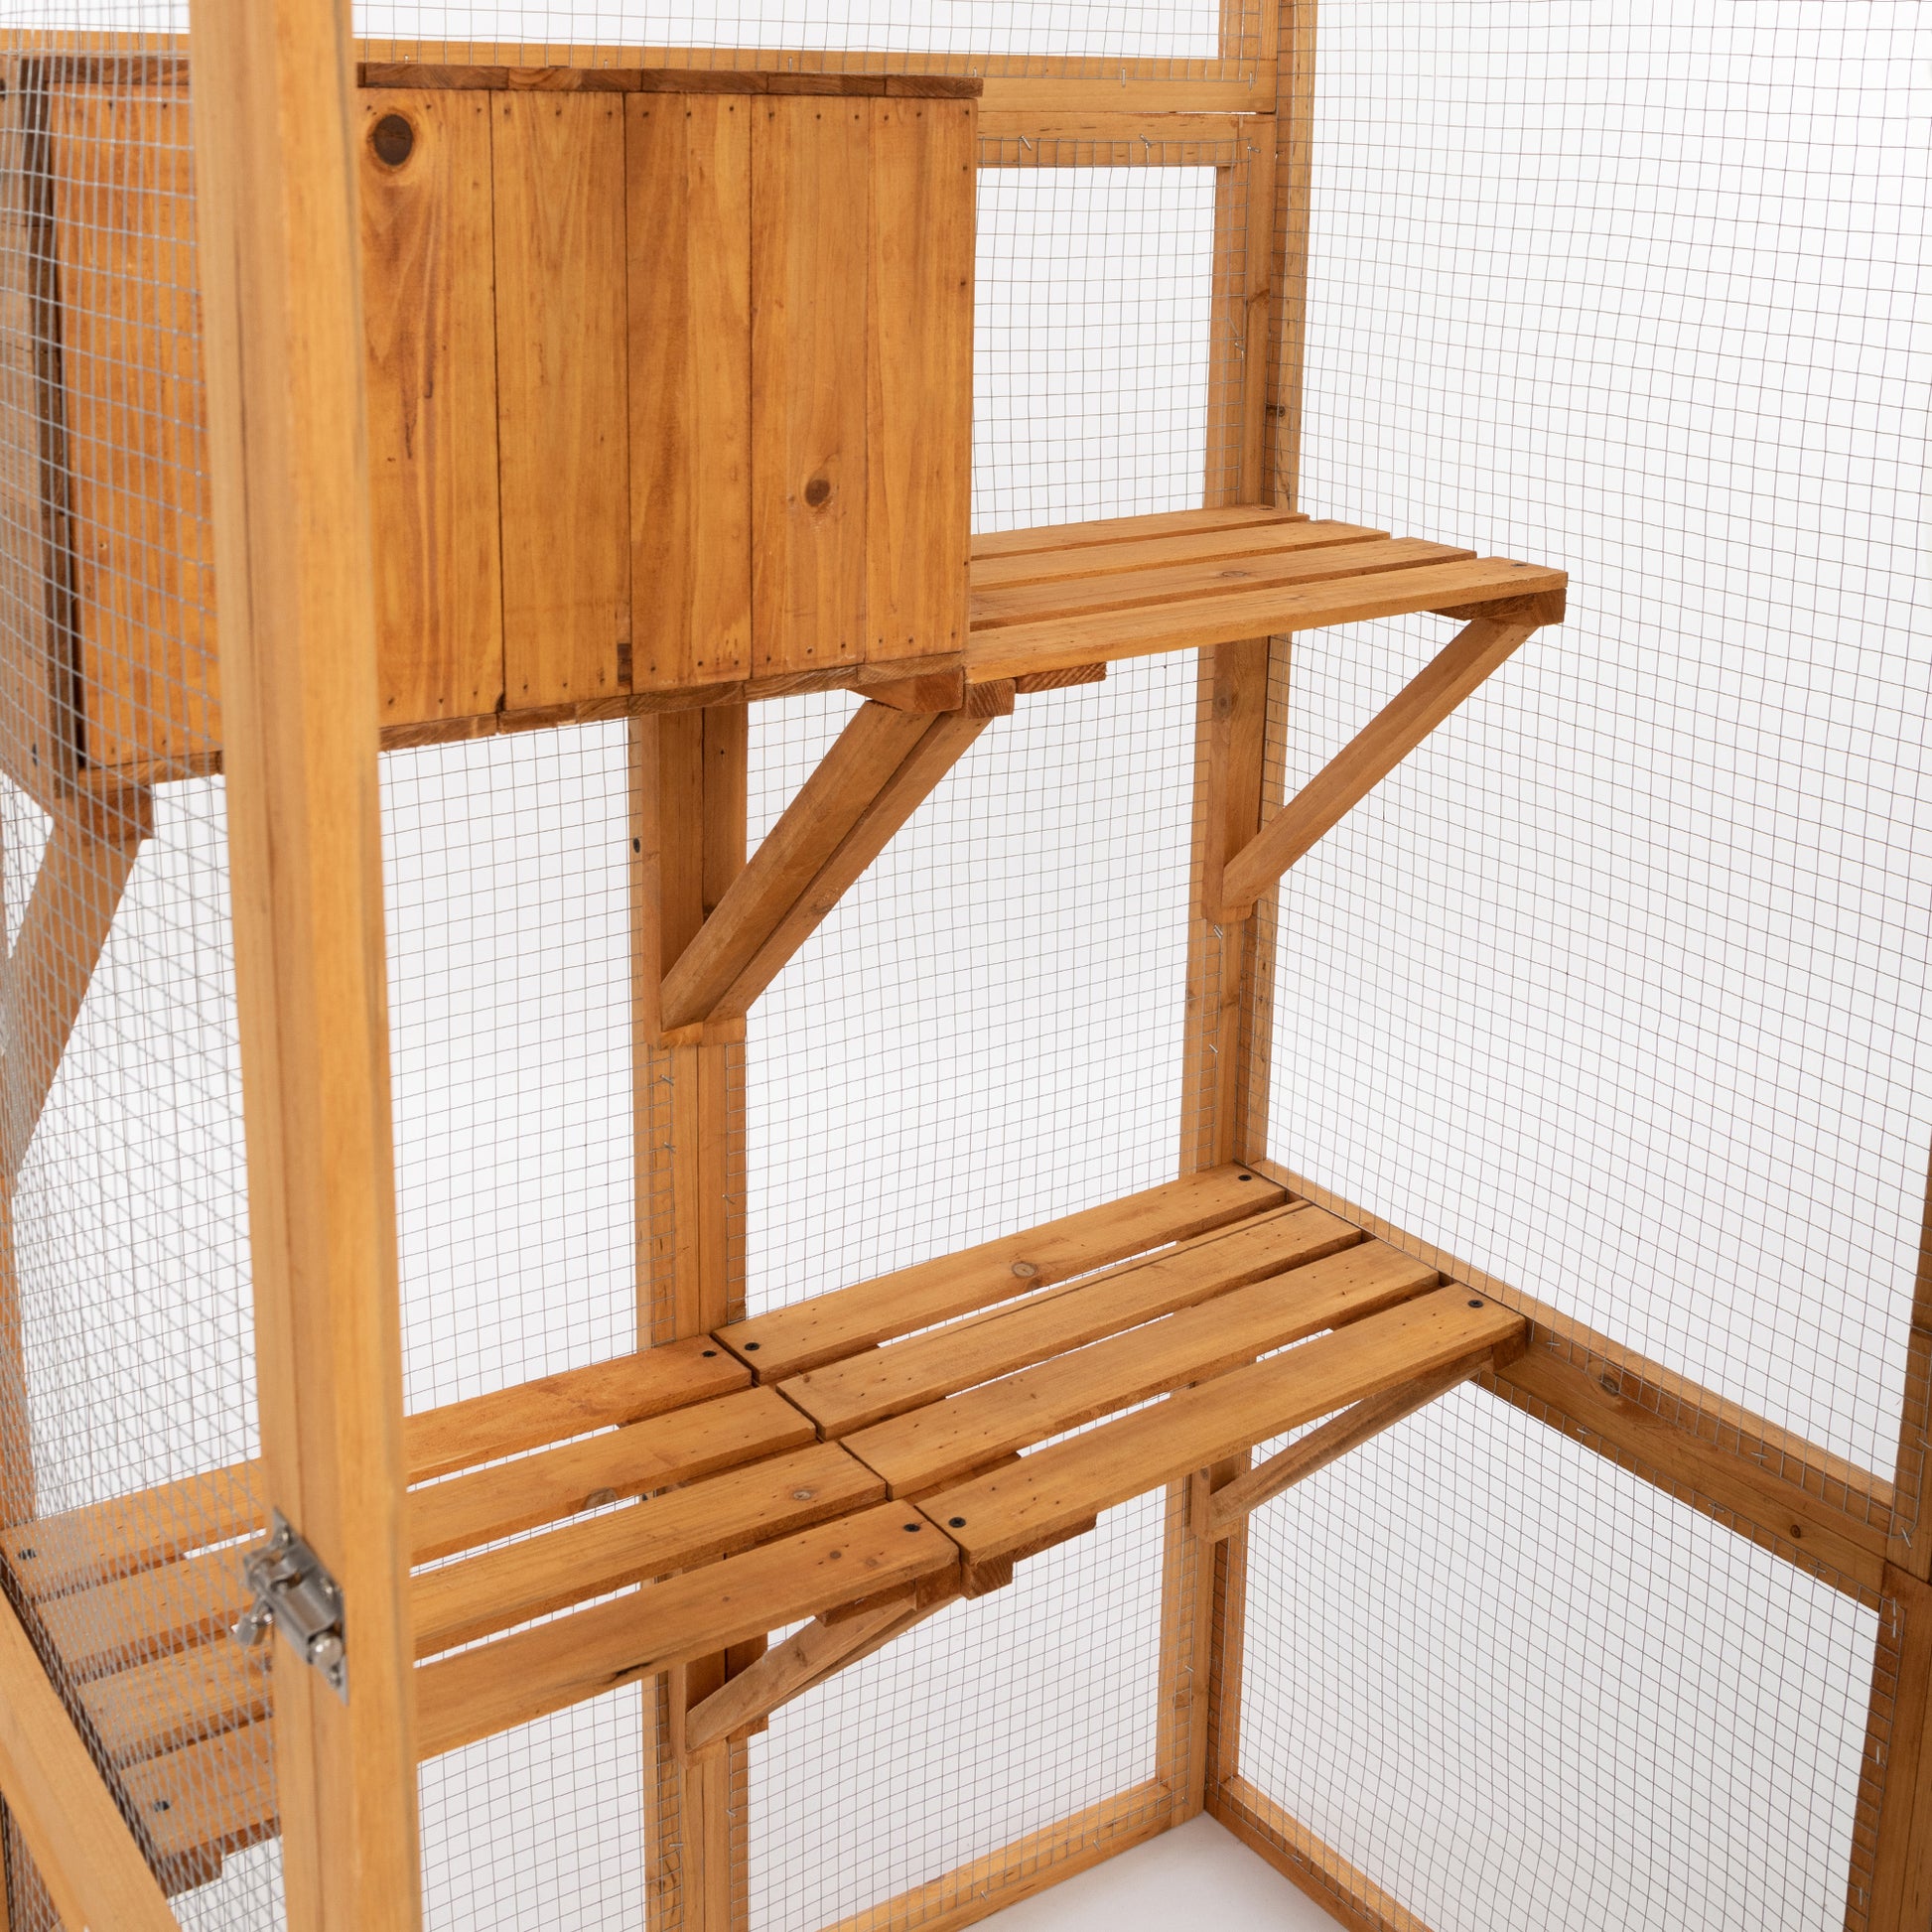 Outdoor Cat Enclosure, Large Wood Cat Cage with